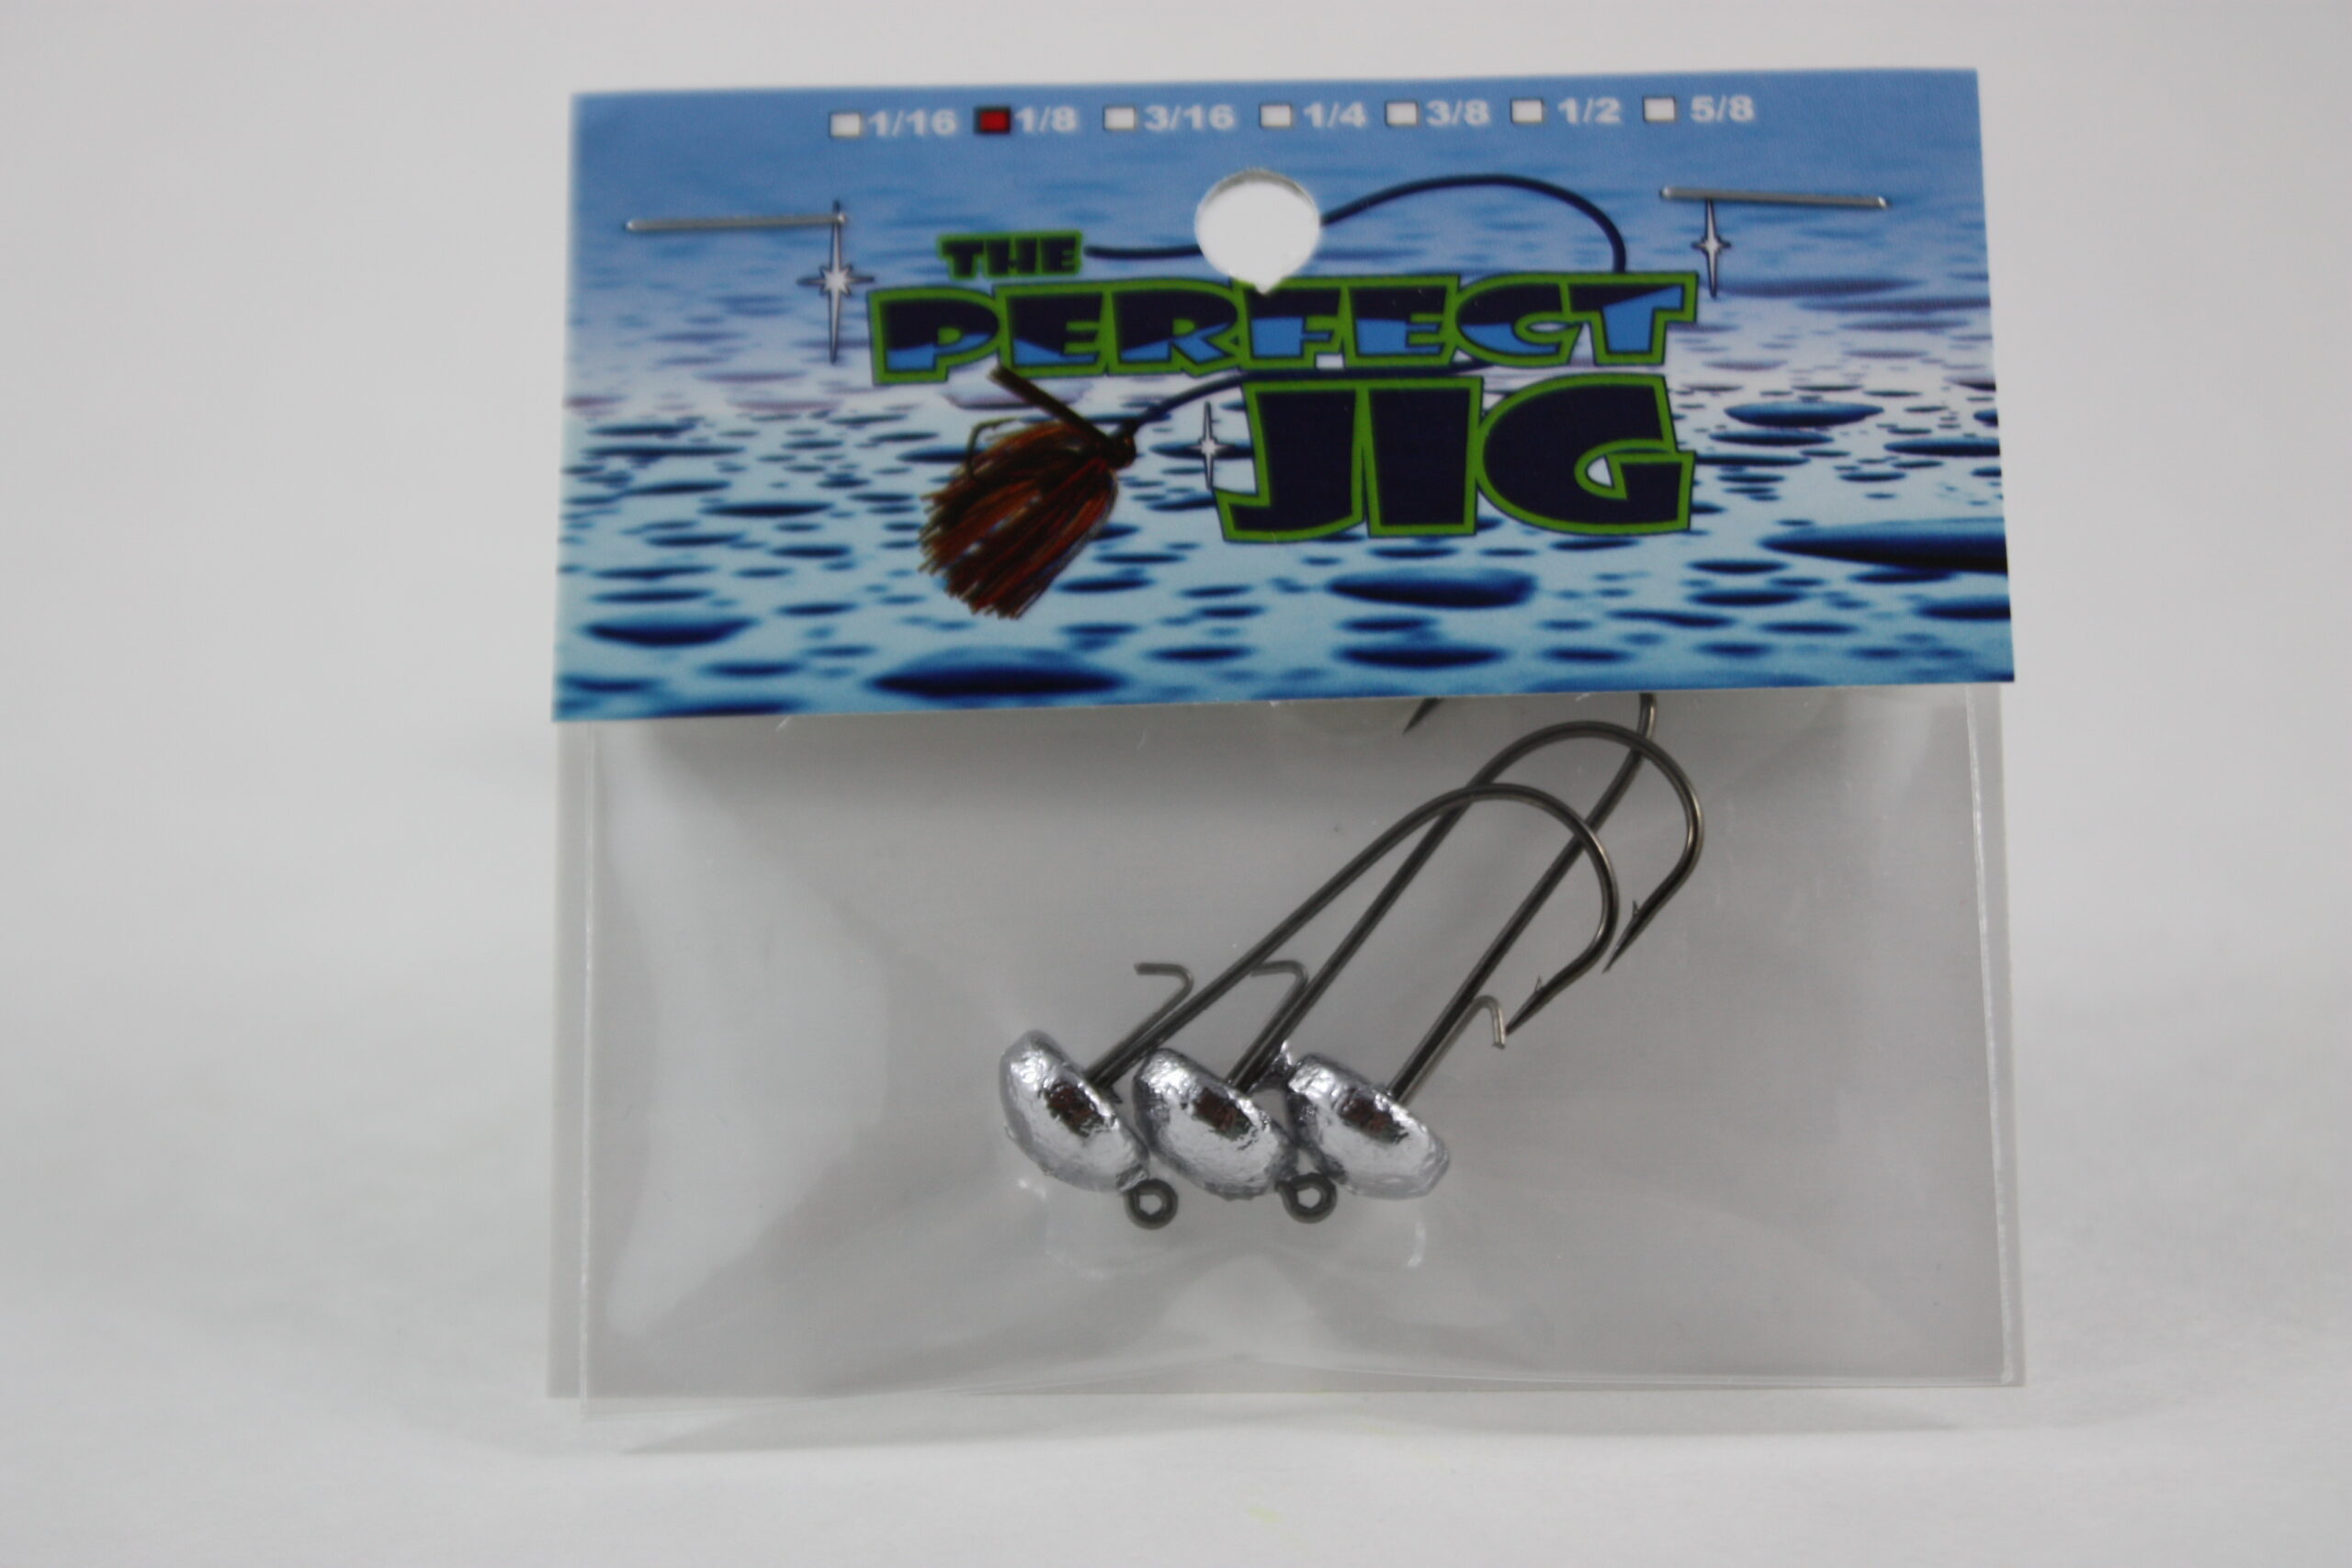 Ned Rig head-1/8oz - The Perfect Jig